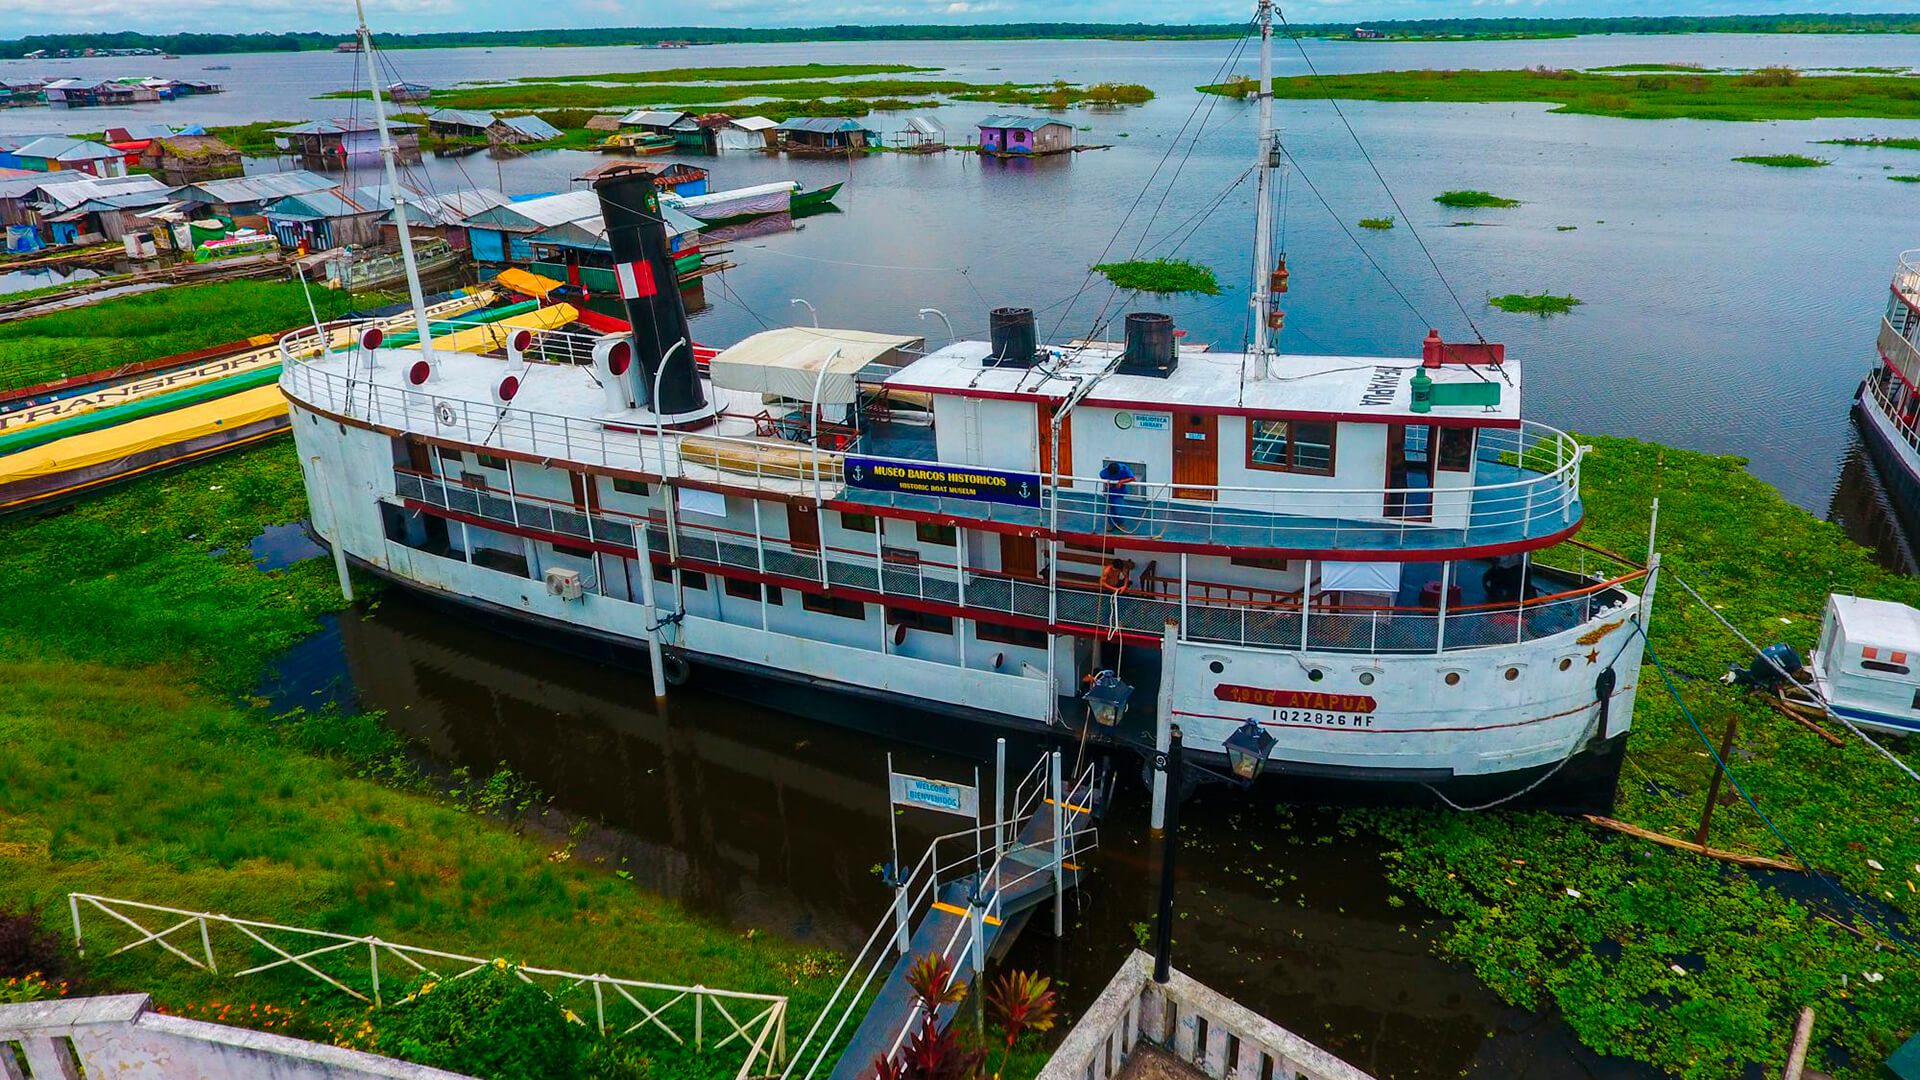 A museum of boat replicas inside an off-service boat in Iquitos | RESPONSible Travel Peru